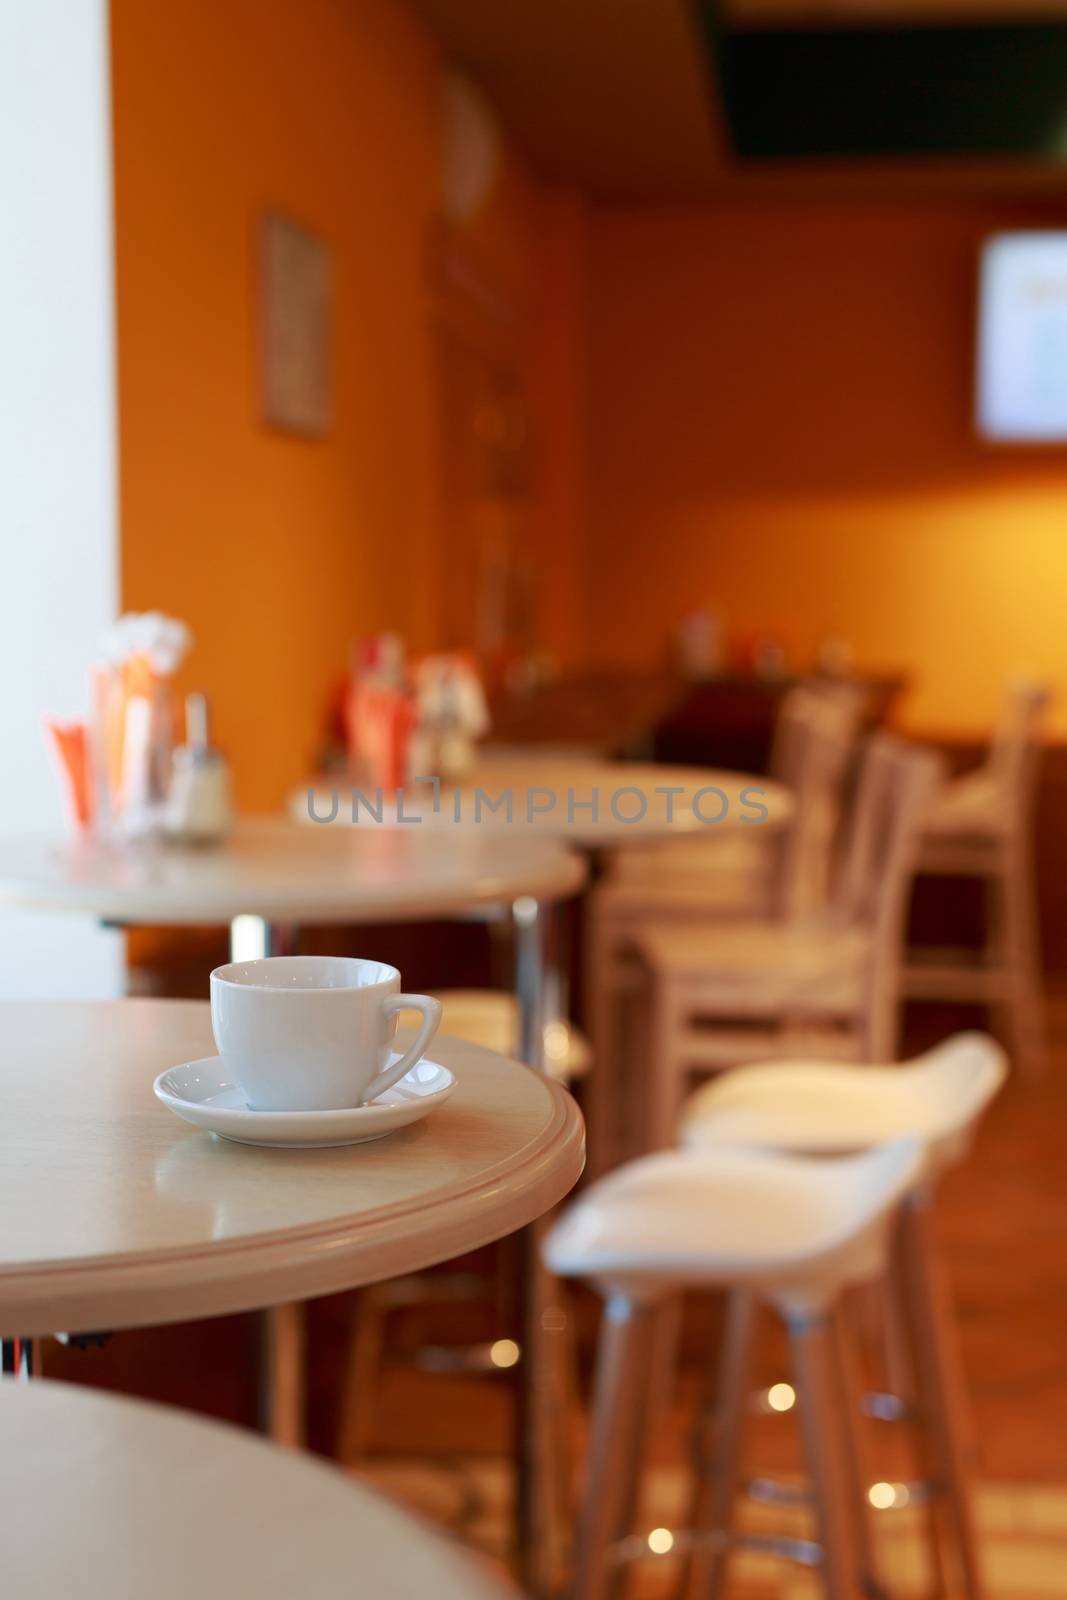 coffee Cup is on the table in a cafe with a blurry background , white tea Cup, Breakfast, cafe background orange by dikkens